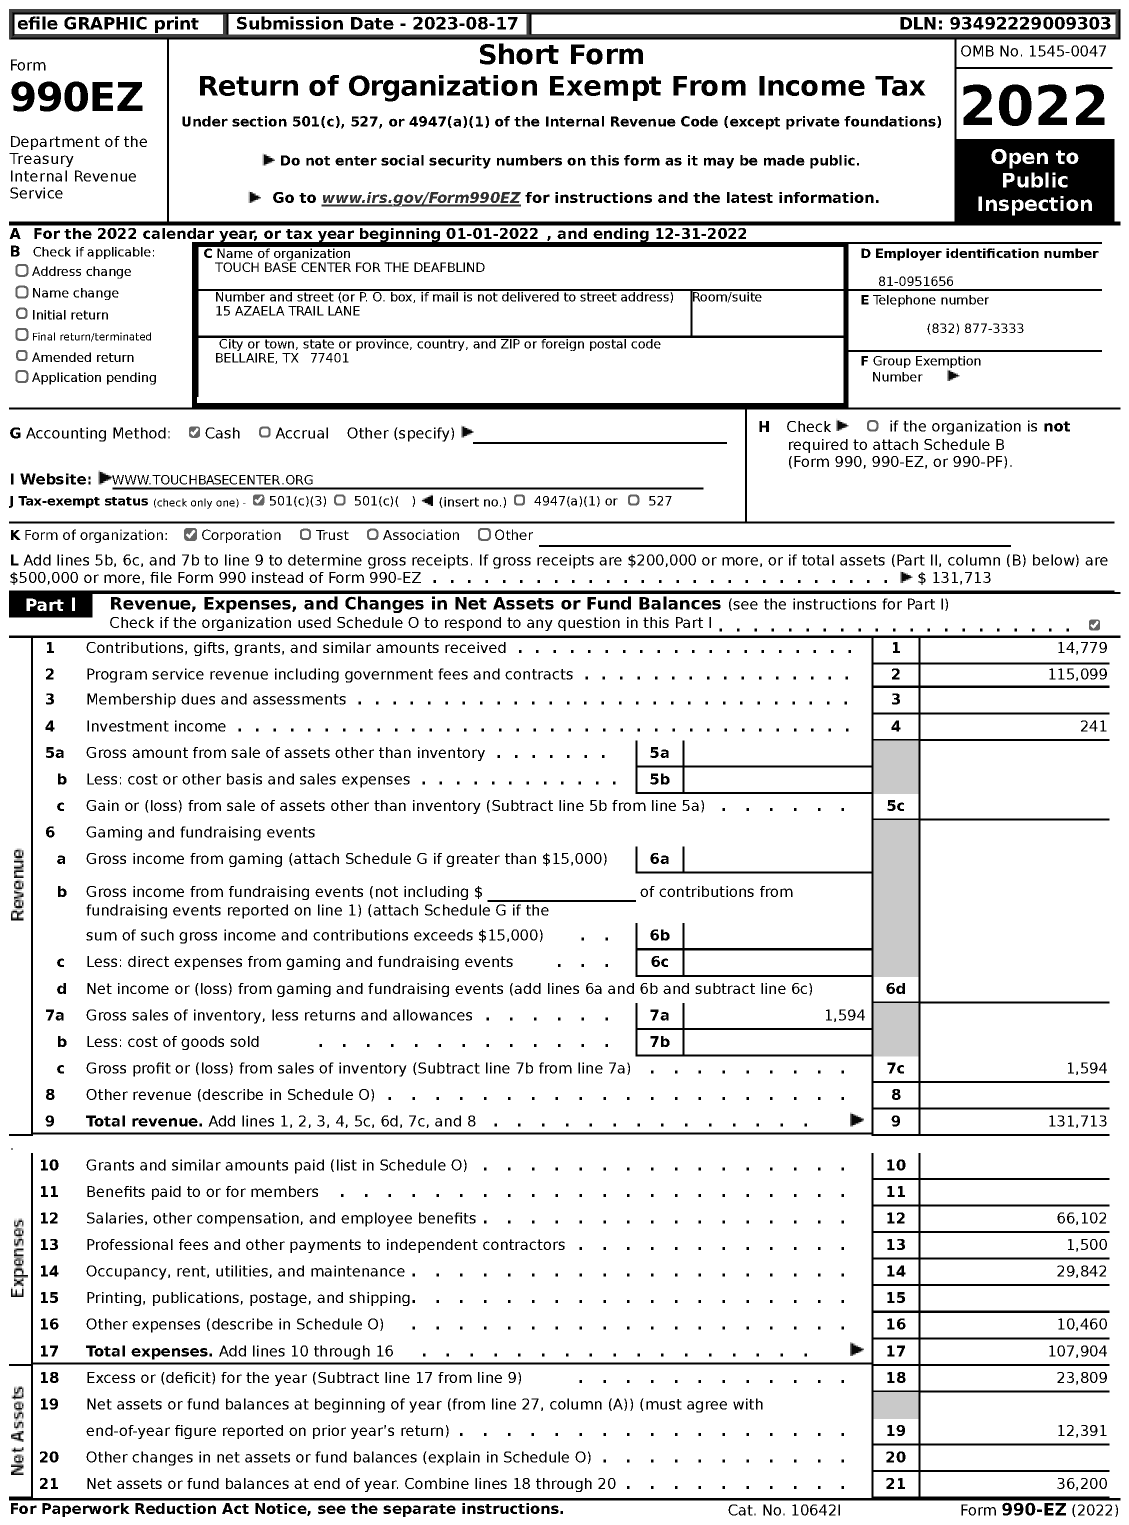 Image of first page of 2022 Form 990EZ for Touch Base Center for the Deafblind